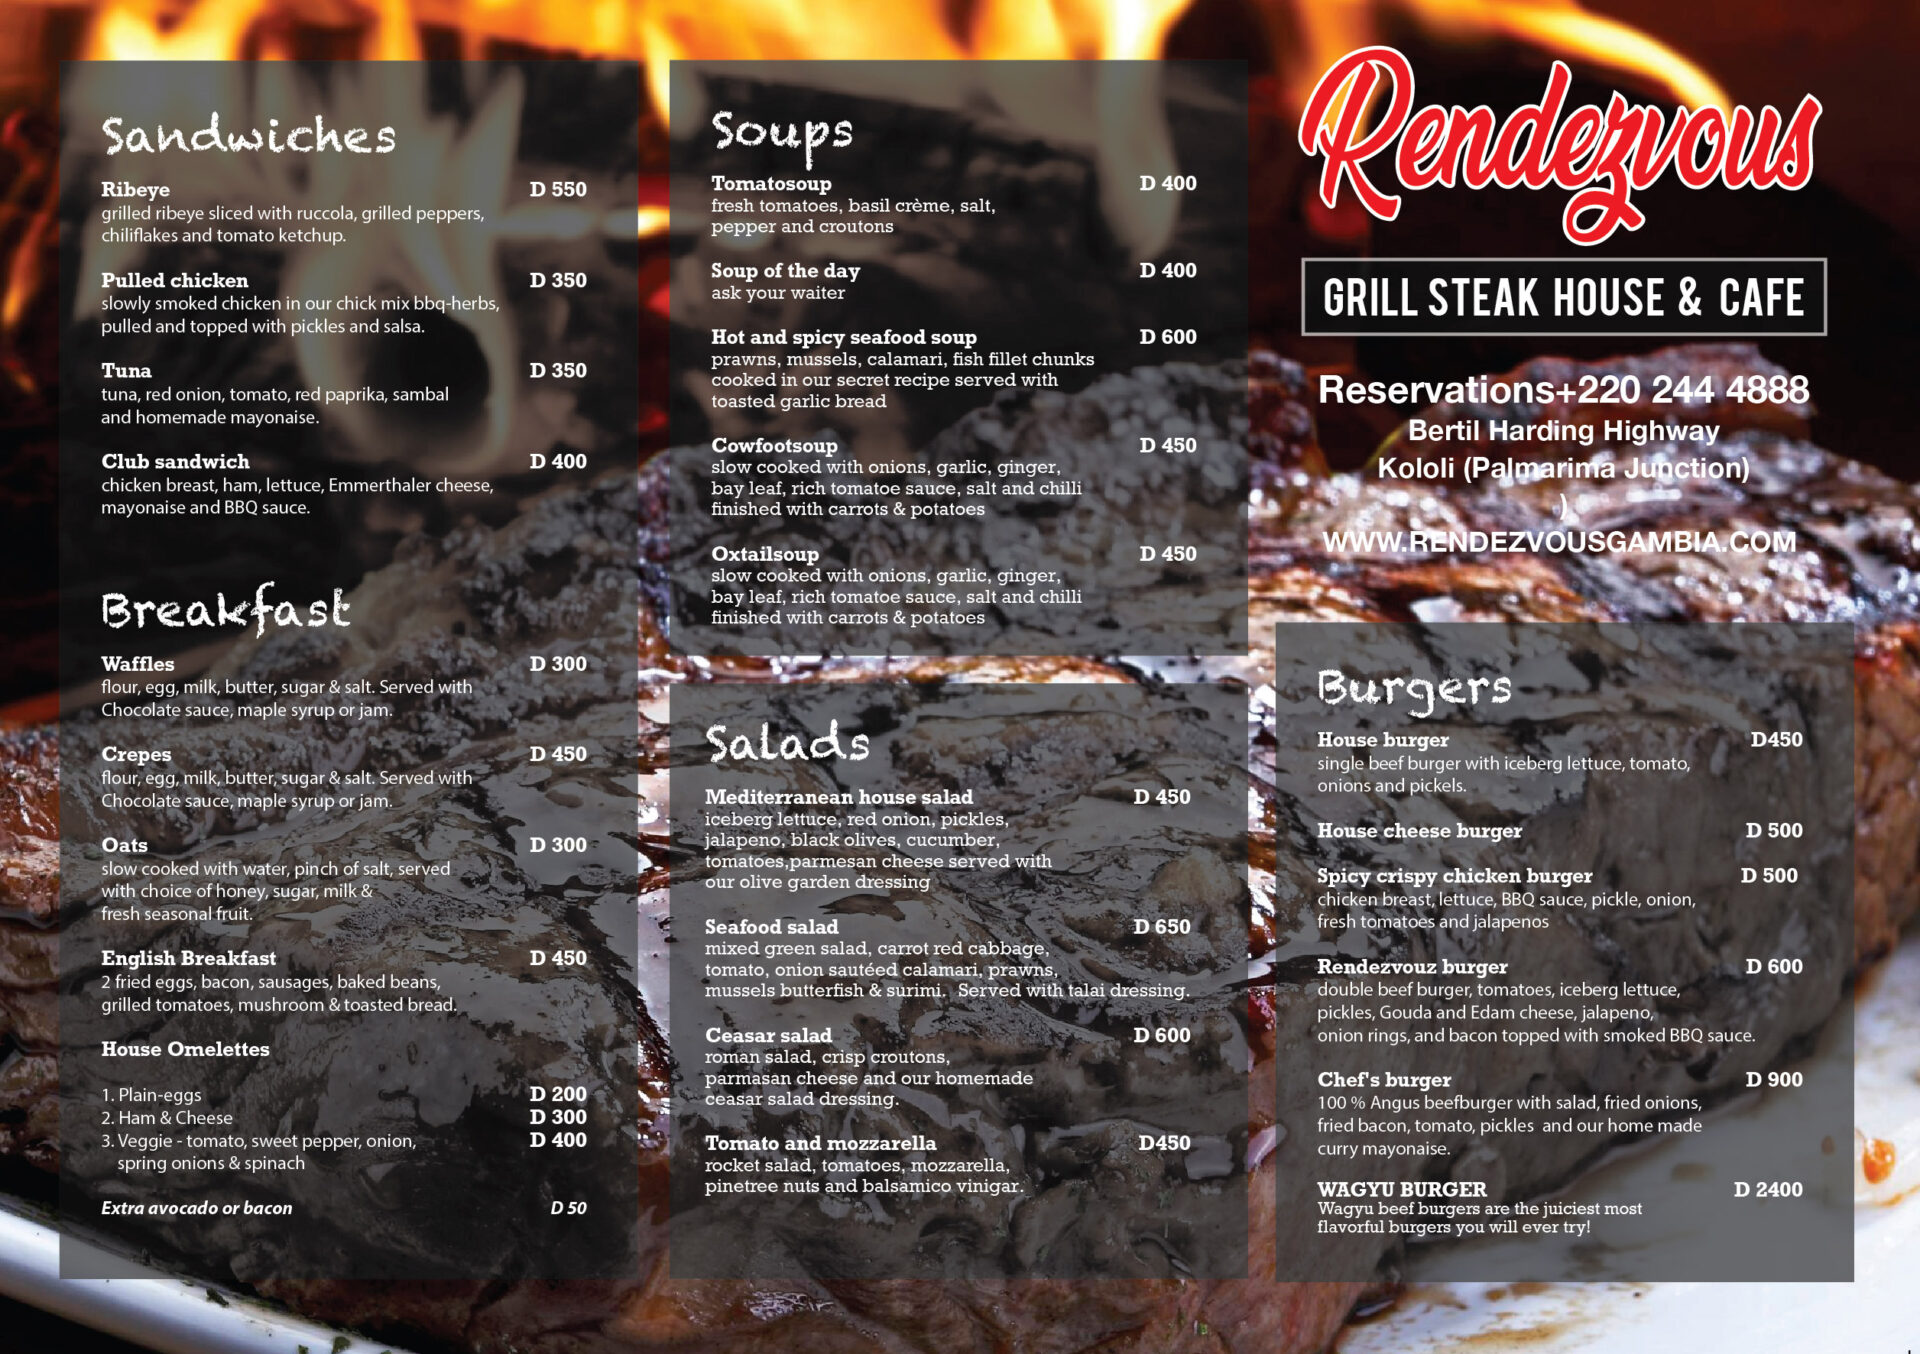 RendezVous Grill Steak House Menu The Gambia